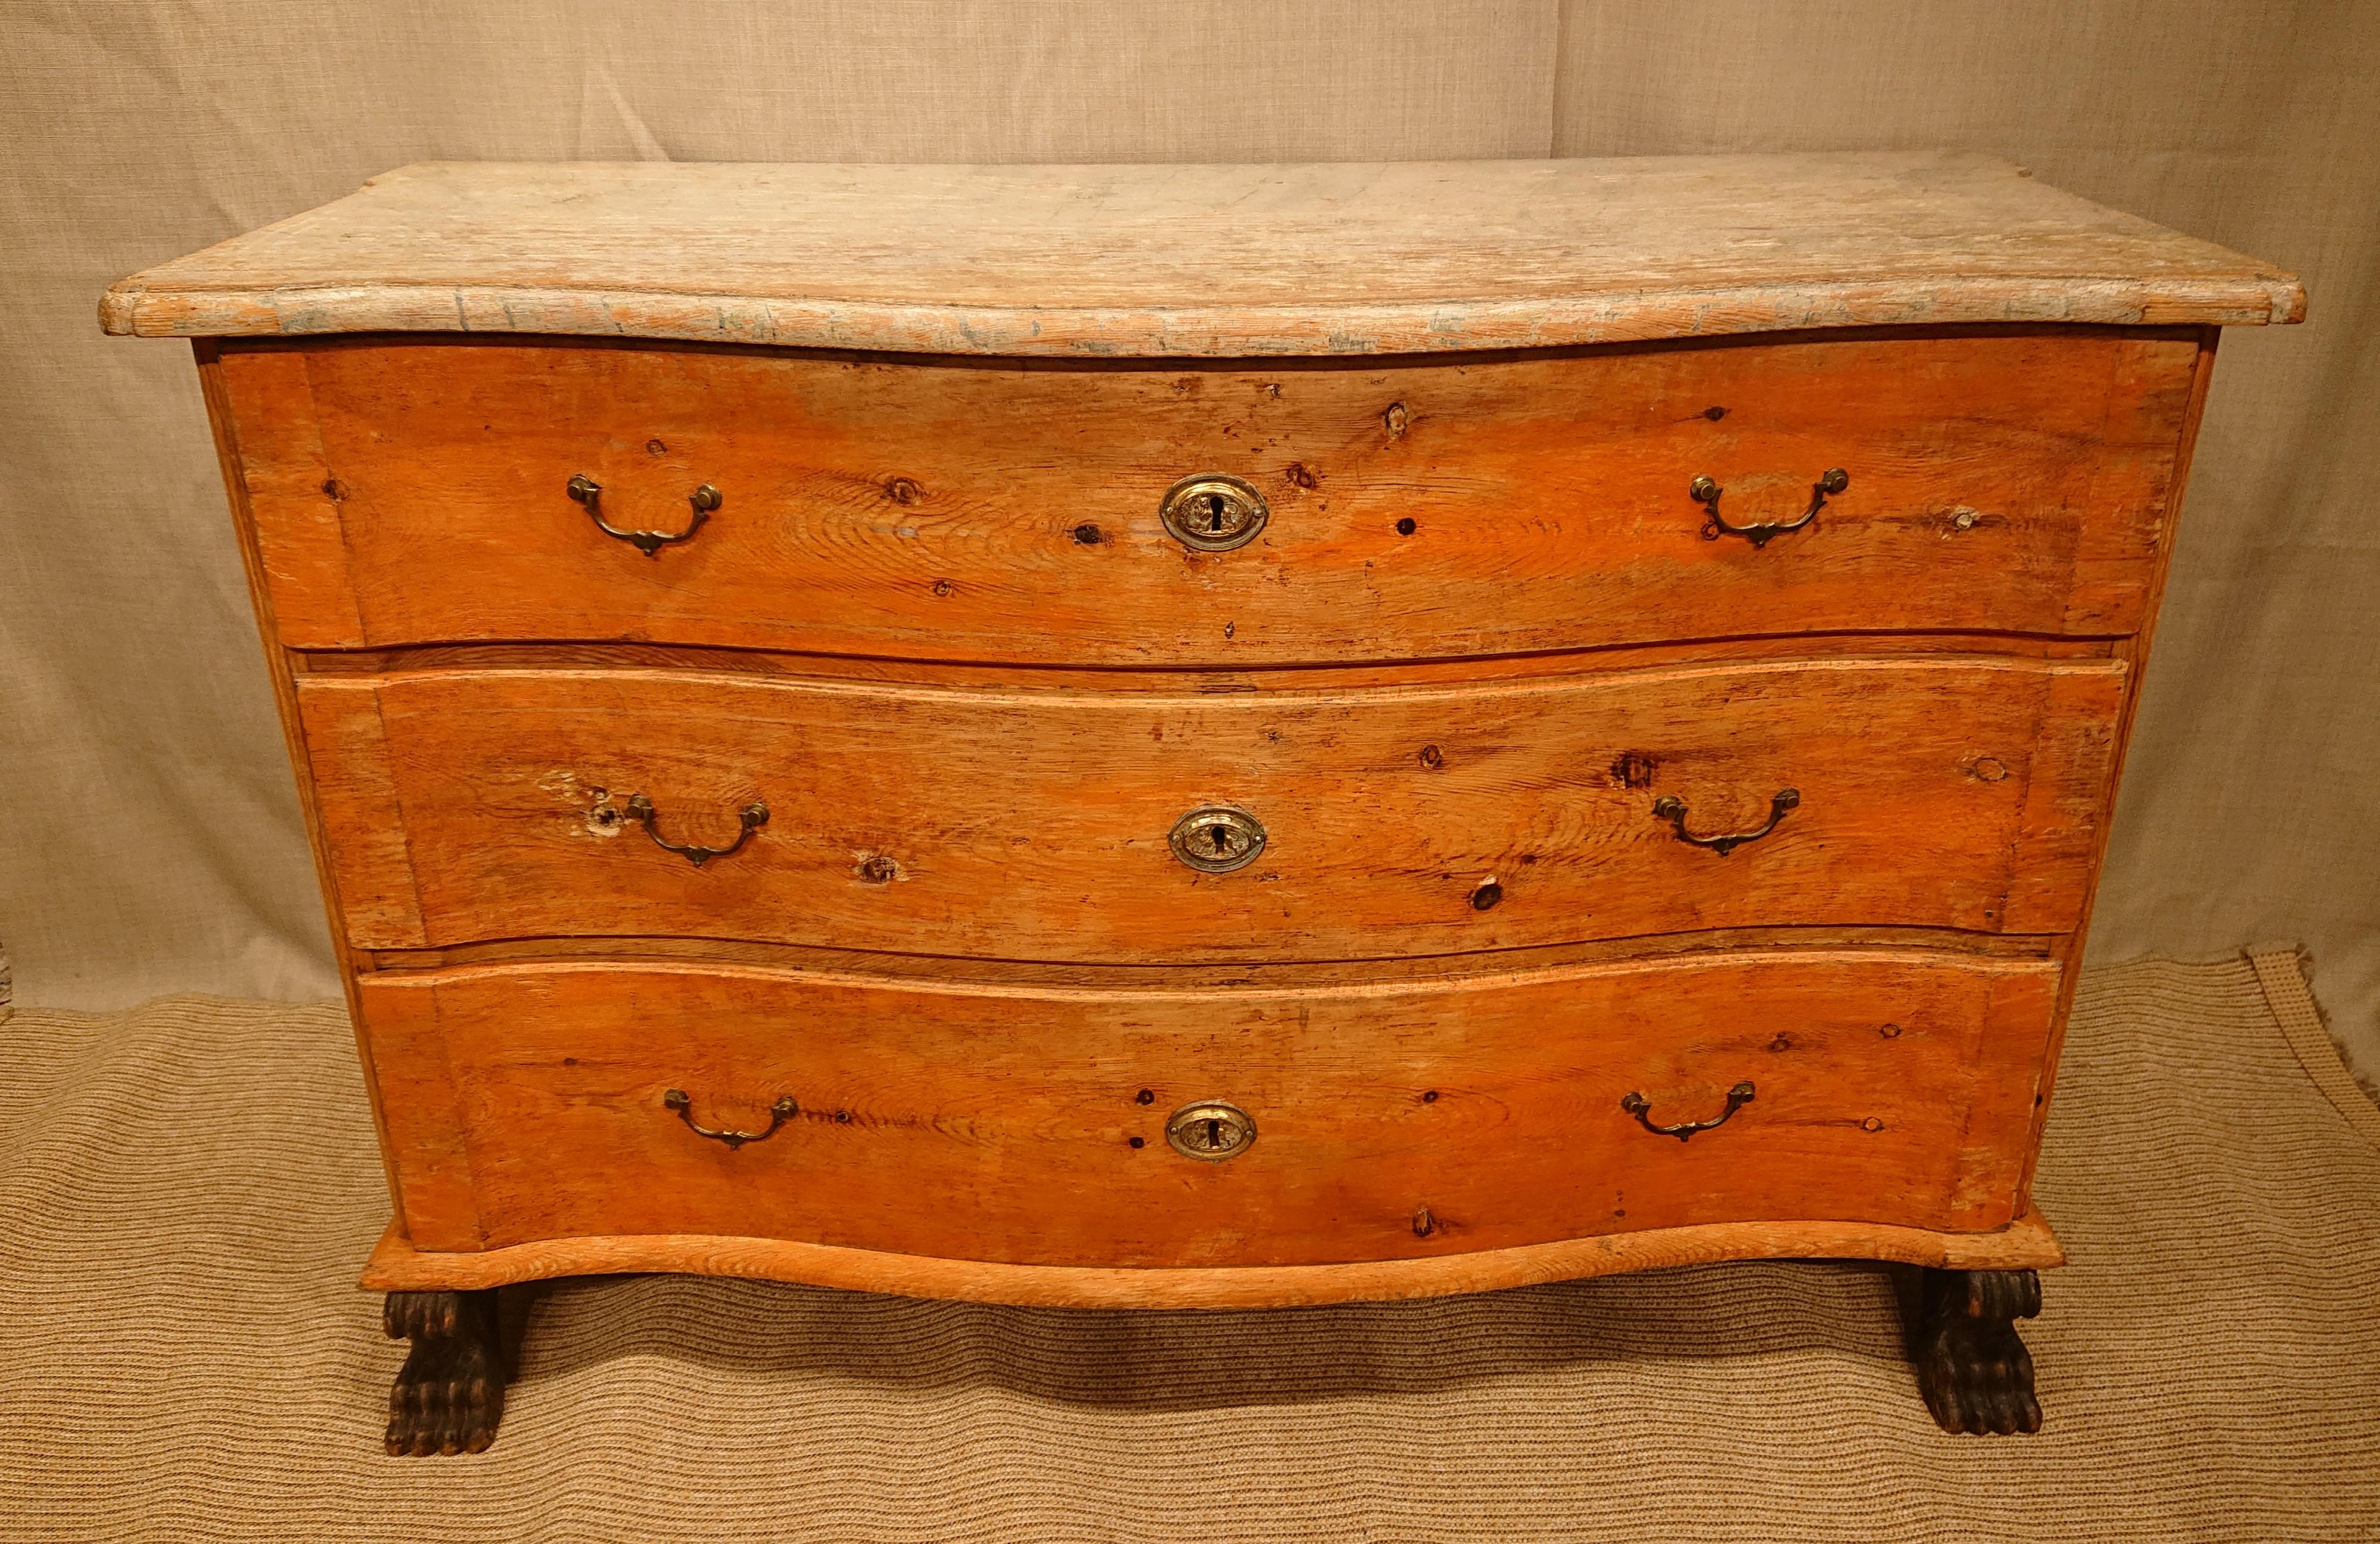 19th Century Swedish style Late Baroque chest of drawers from Ornskoldsvik Angermanland,Northern Sweden.
Scraped to its beautiful colorful originalpaint.
The top has a beautiful marblepaint & beautiful carved details.
Lovely feet in form of